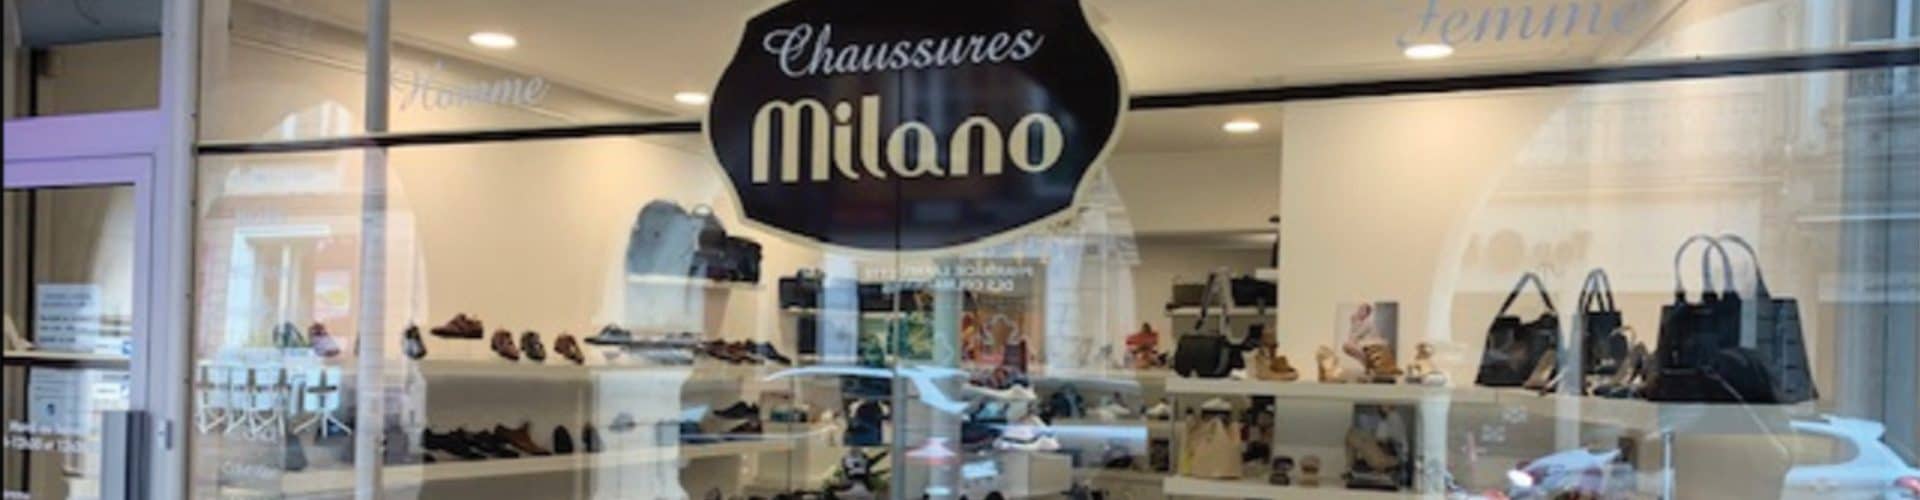 Chaussures Milano